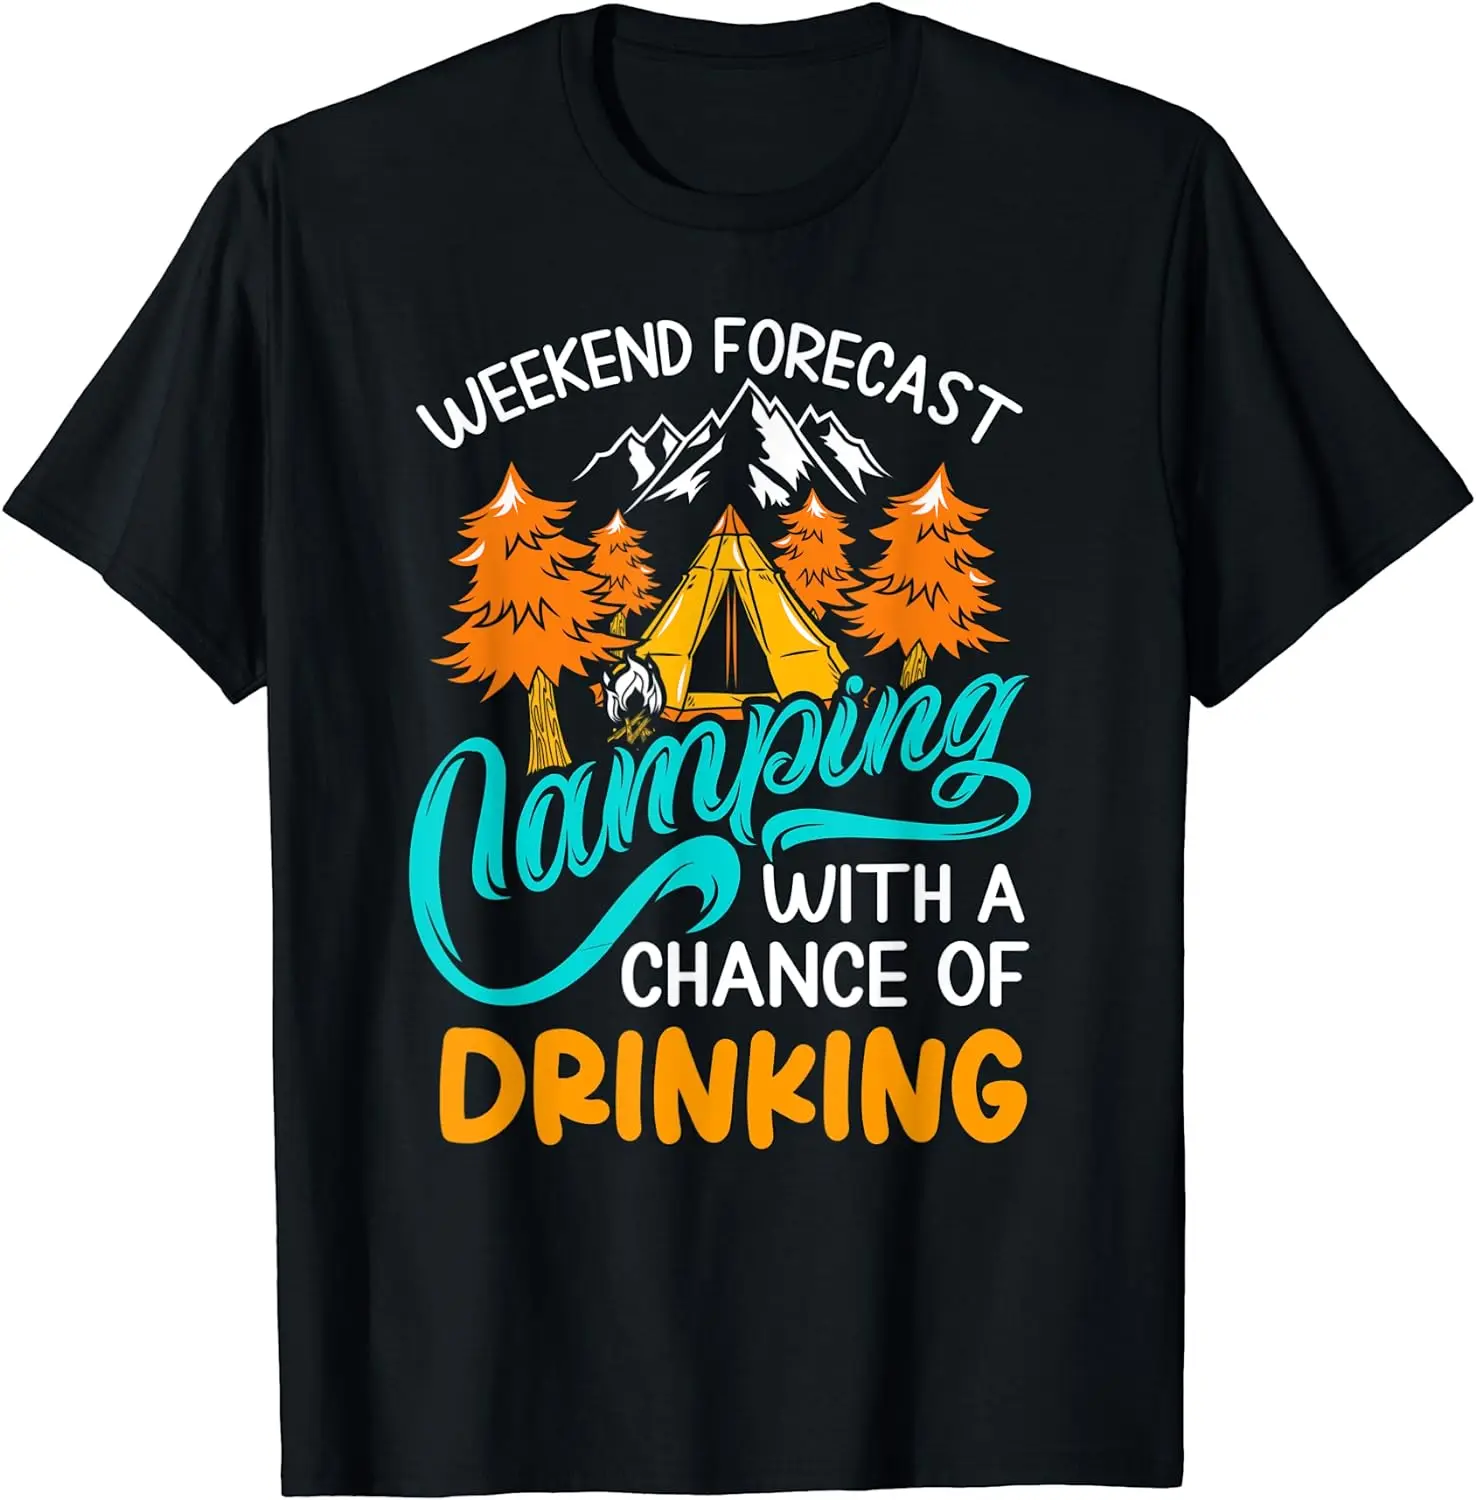 

Weekend Forecast Camping with A Chance of Drinking T-Shirt for Men Women Family Vacation Travel Casual Cotton Four Seasons Tees